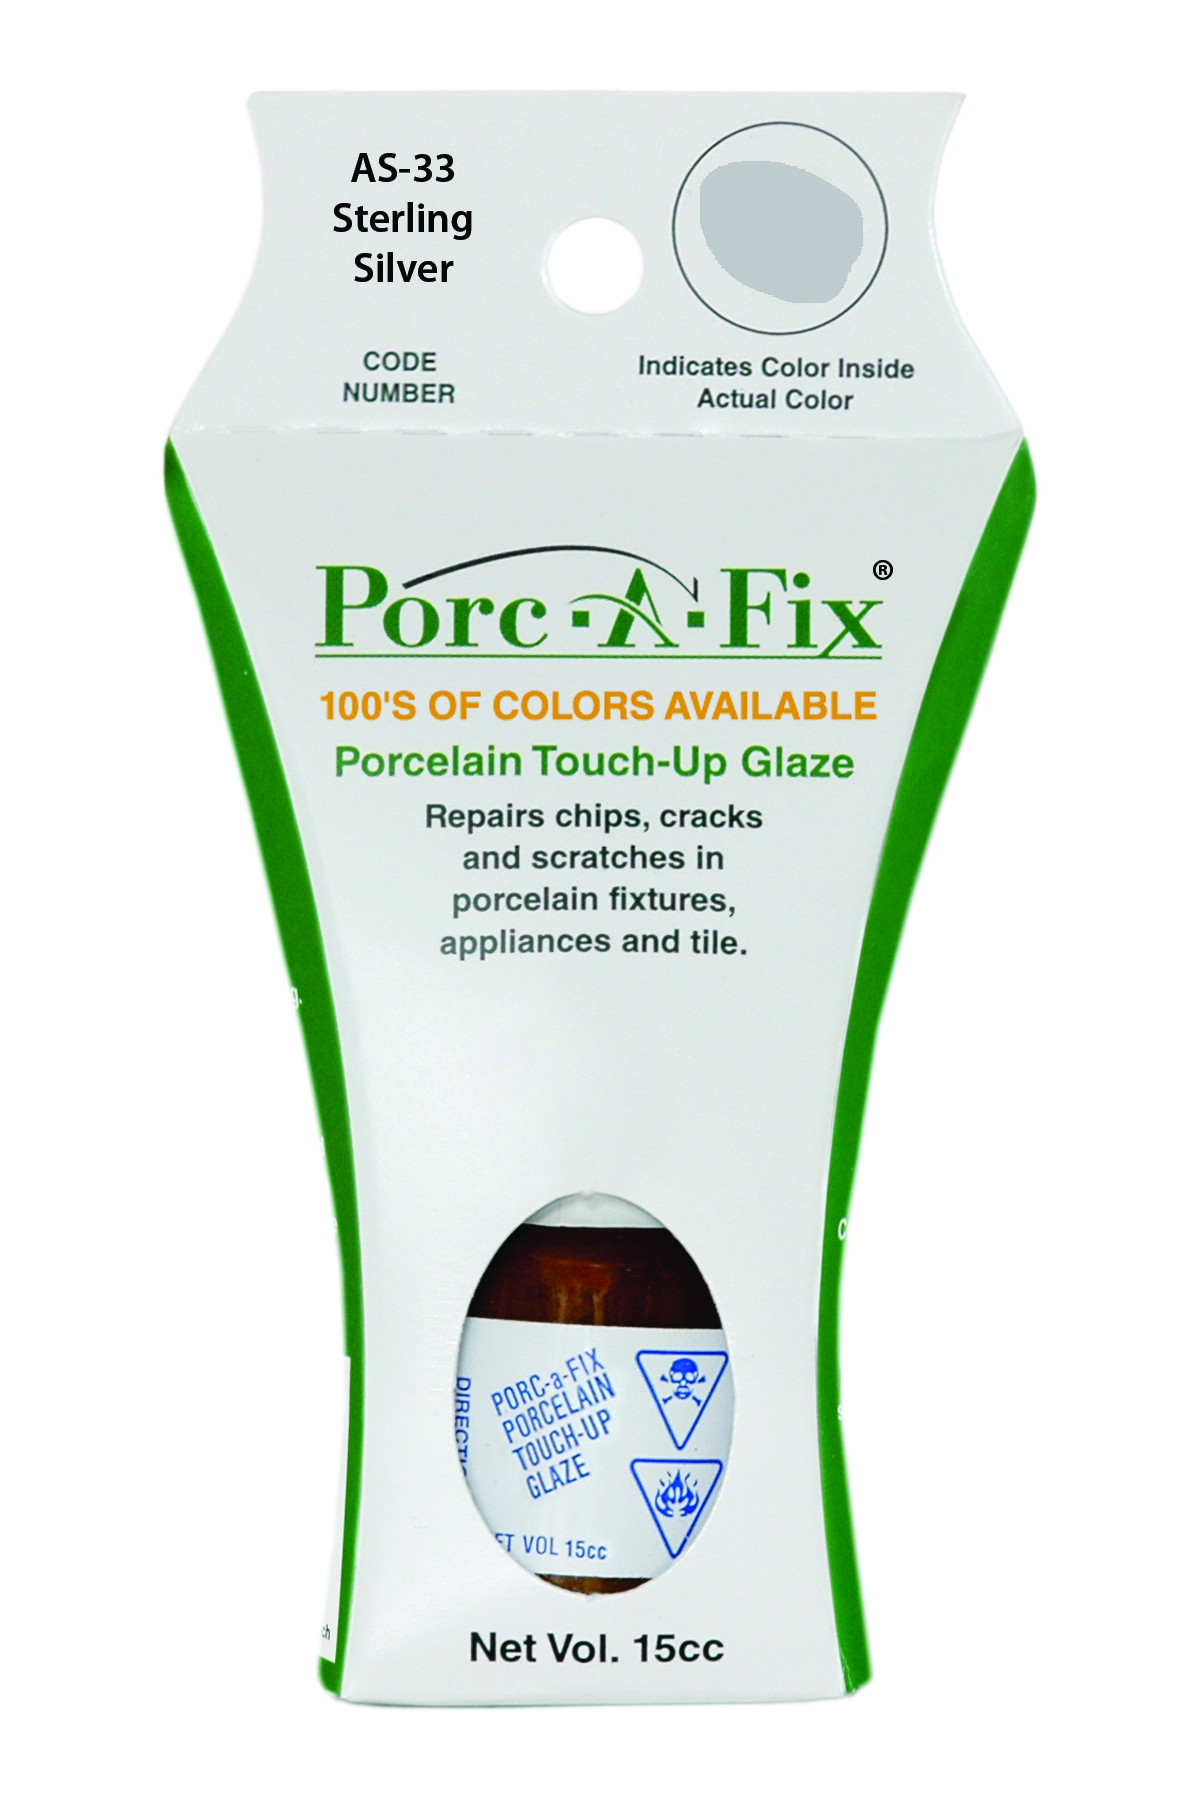 Fixture-Fix | AS-33 | Porc-A-Fix Touch-Up Glaze American Standard Sterling Silver - Compatible with American Standard 070900-1650A Touch Up Paint Kit - STERLING SILVER